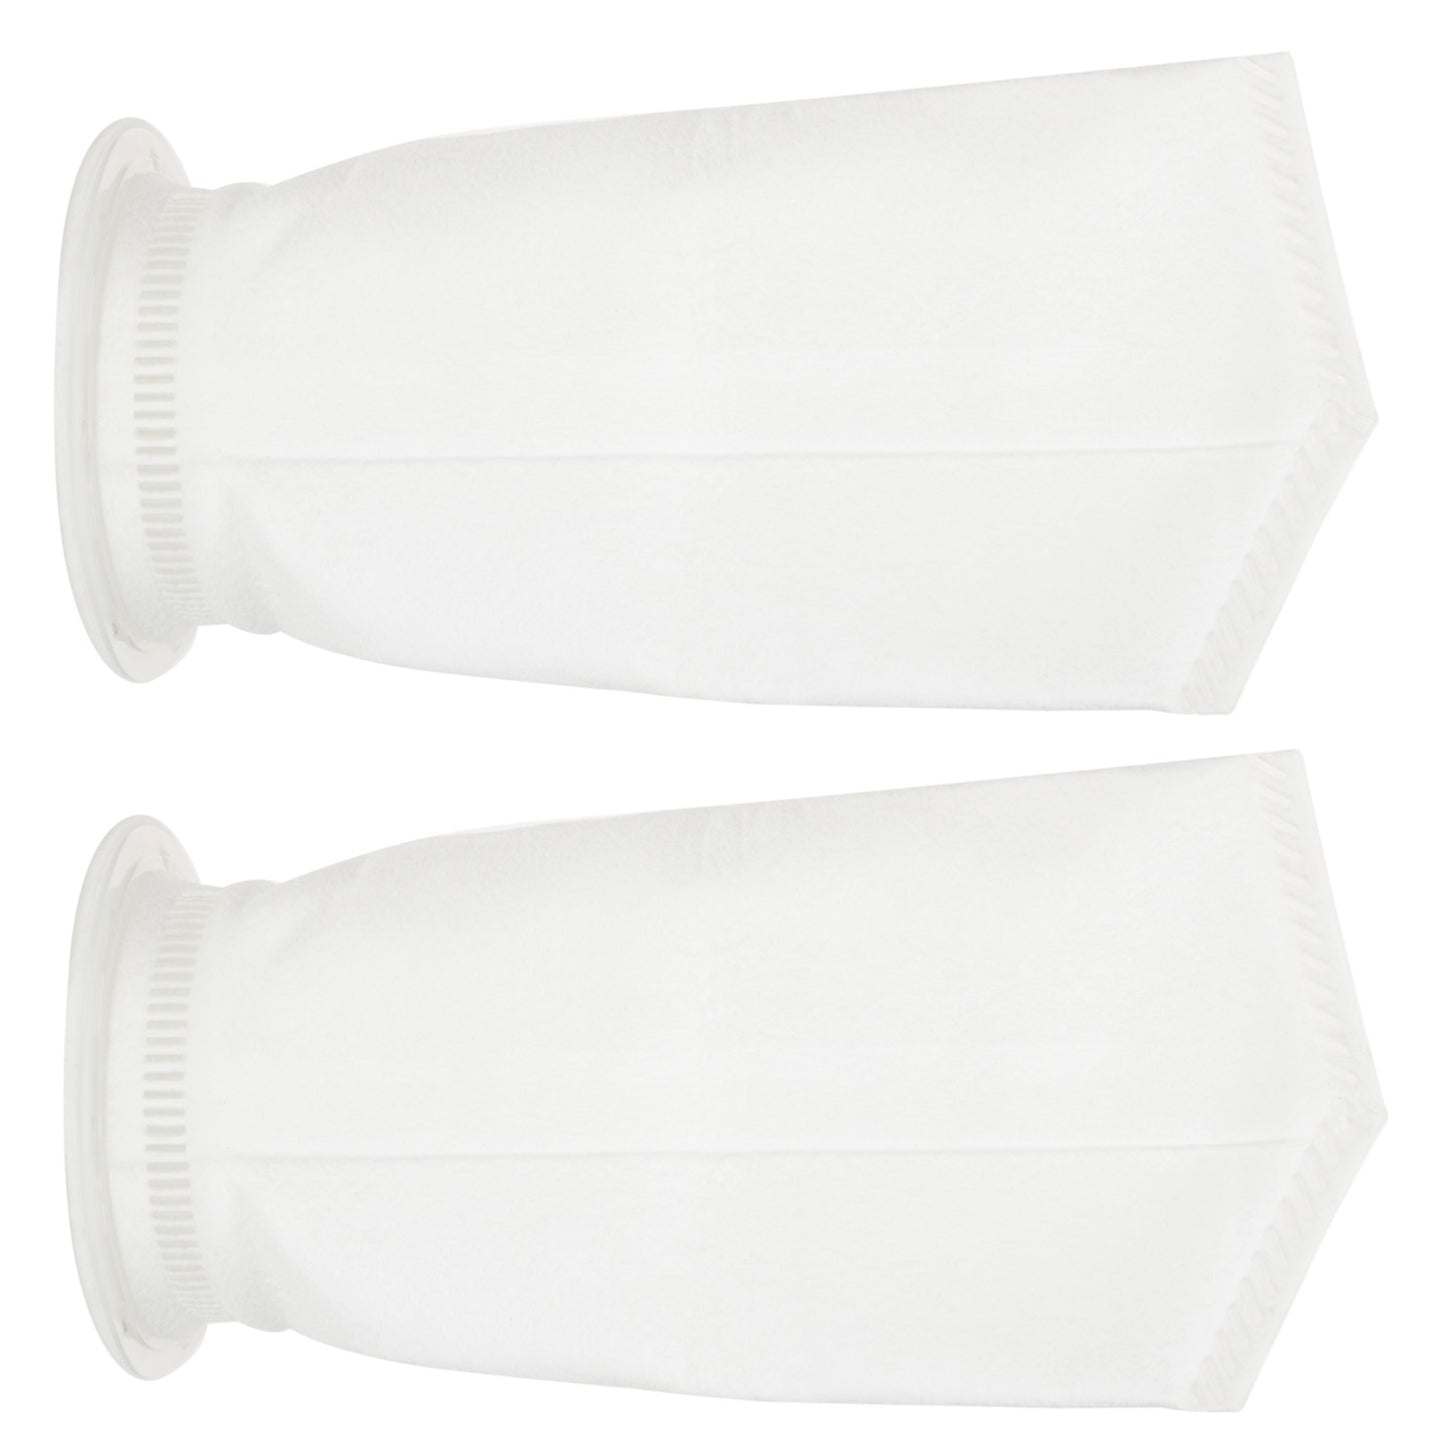 Sediment Filter FB-10-1M, Filter Bag 1 Micron for filtering sand (10 inch, Pack of 2)